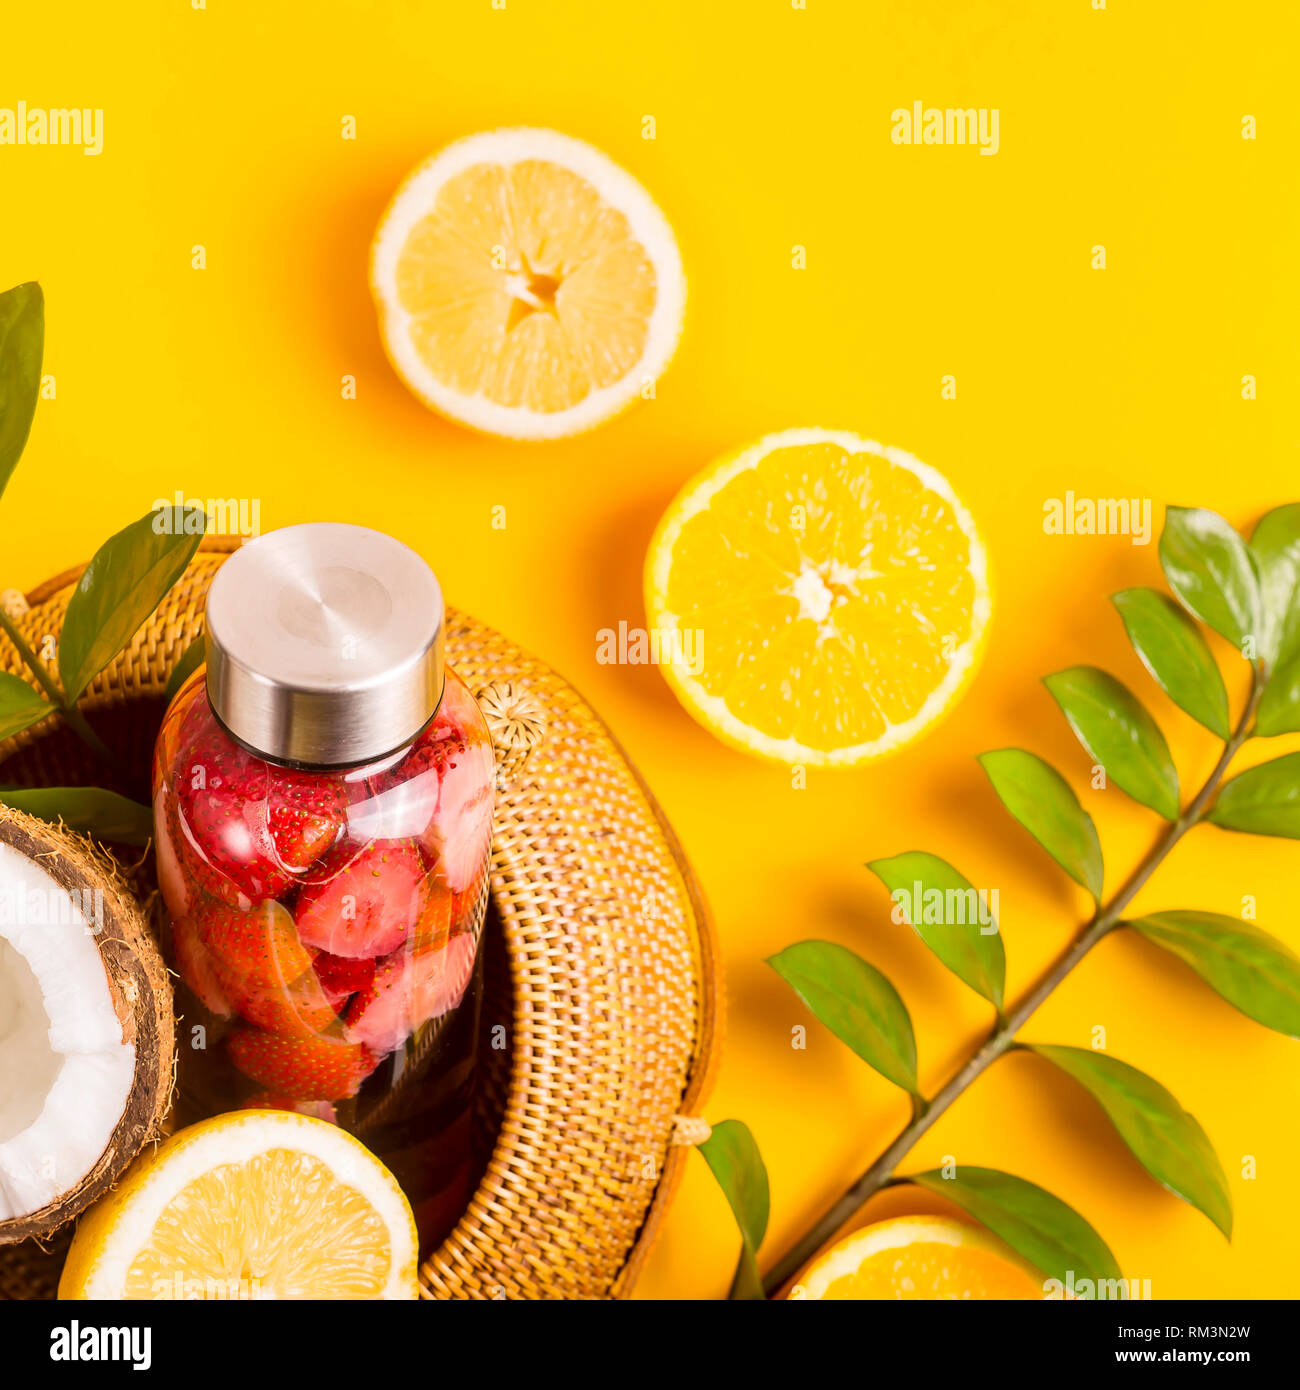 Top View Paper Bag With Fresh Organic Tangerines On A Vibrant Yellow  Background Stock Photo, Picture and Royalty Free Image. Image 134591070.